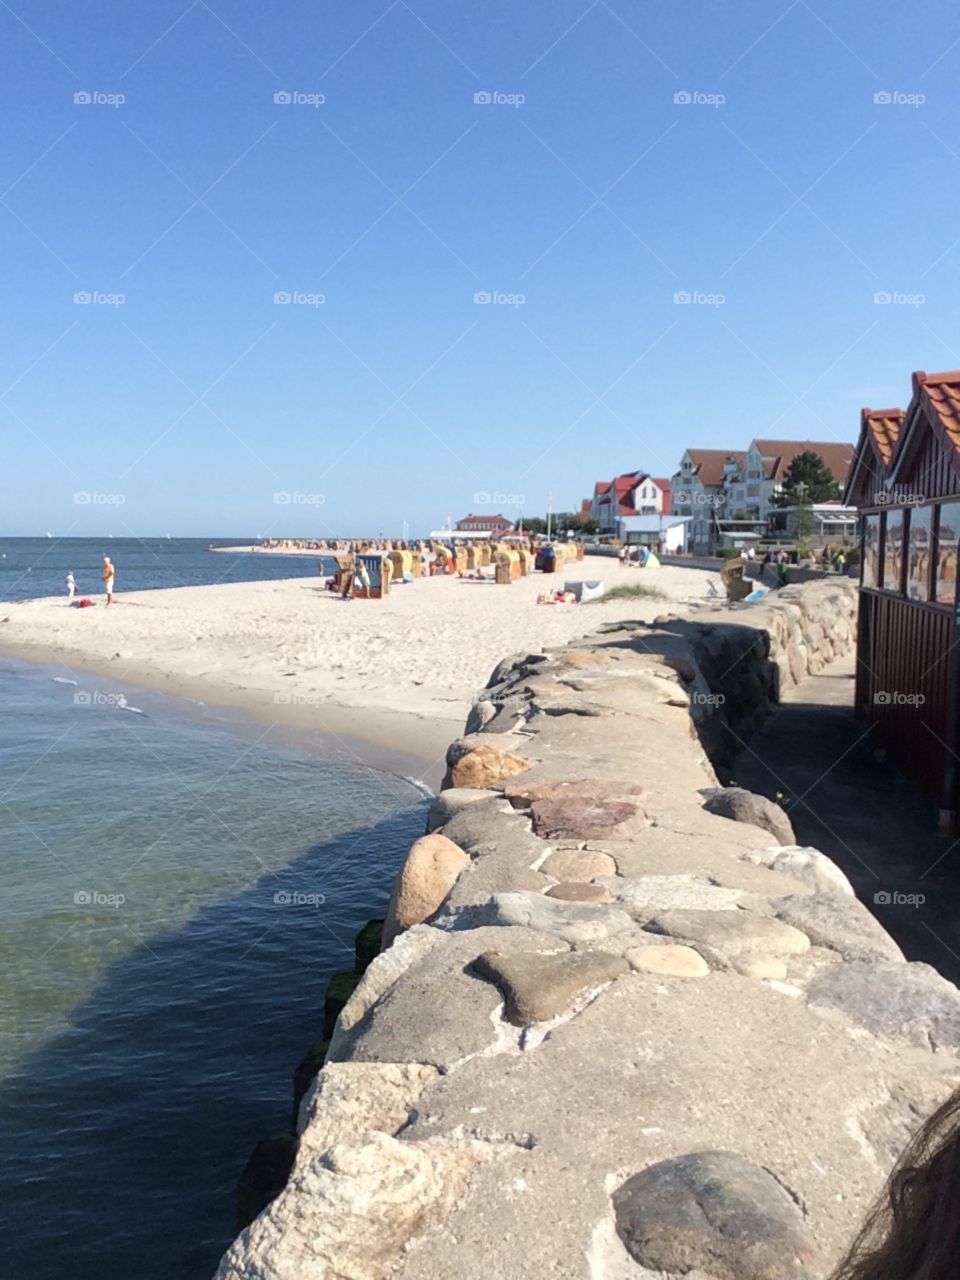 Beach in Northern Germany 